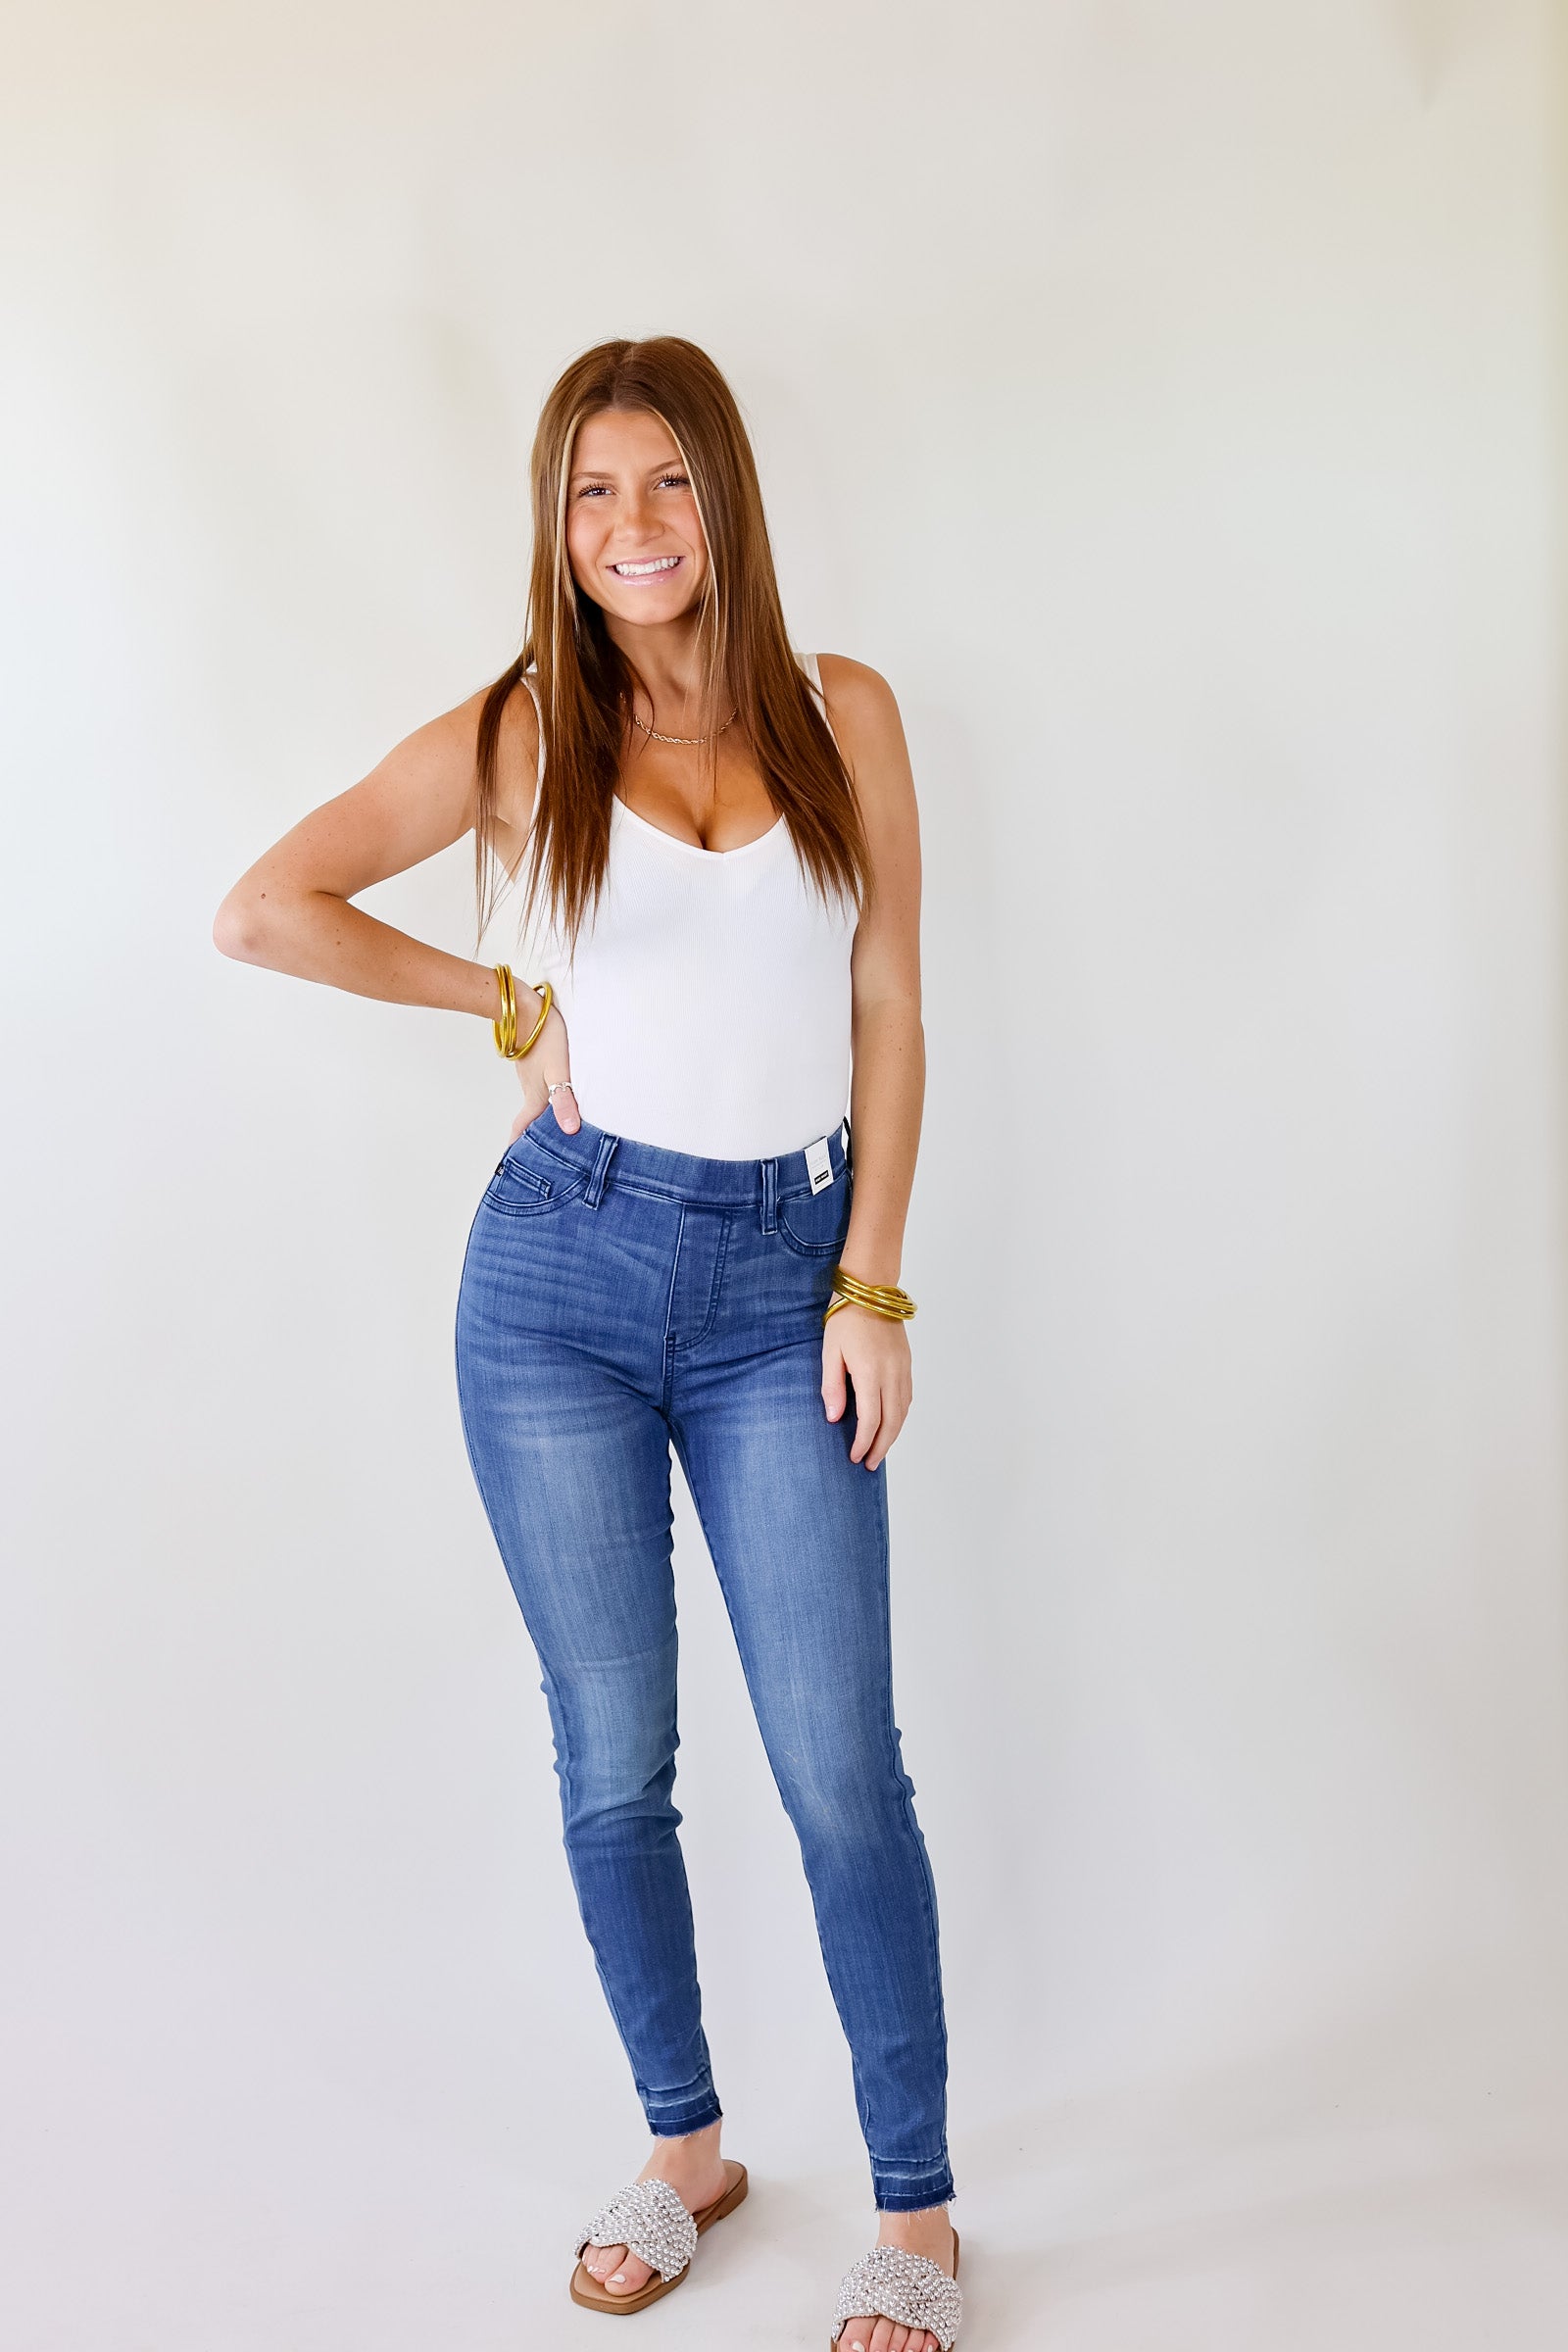 Judy Blue | Free To Dream Elastic Waist Pull On Skinny Jeans with Release Hem in Medium Wash